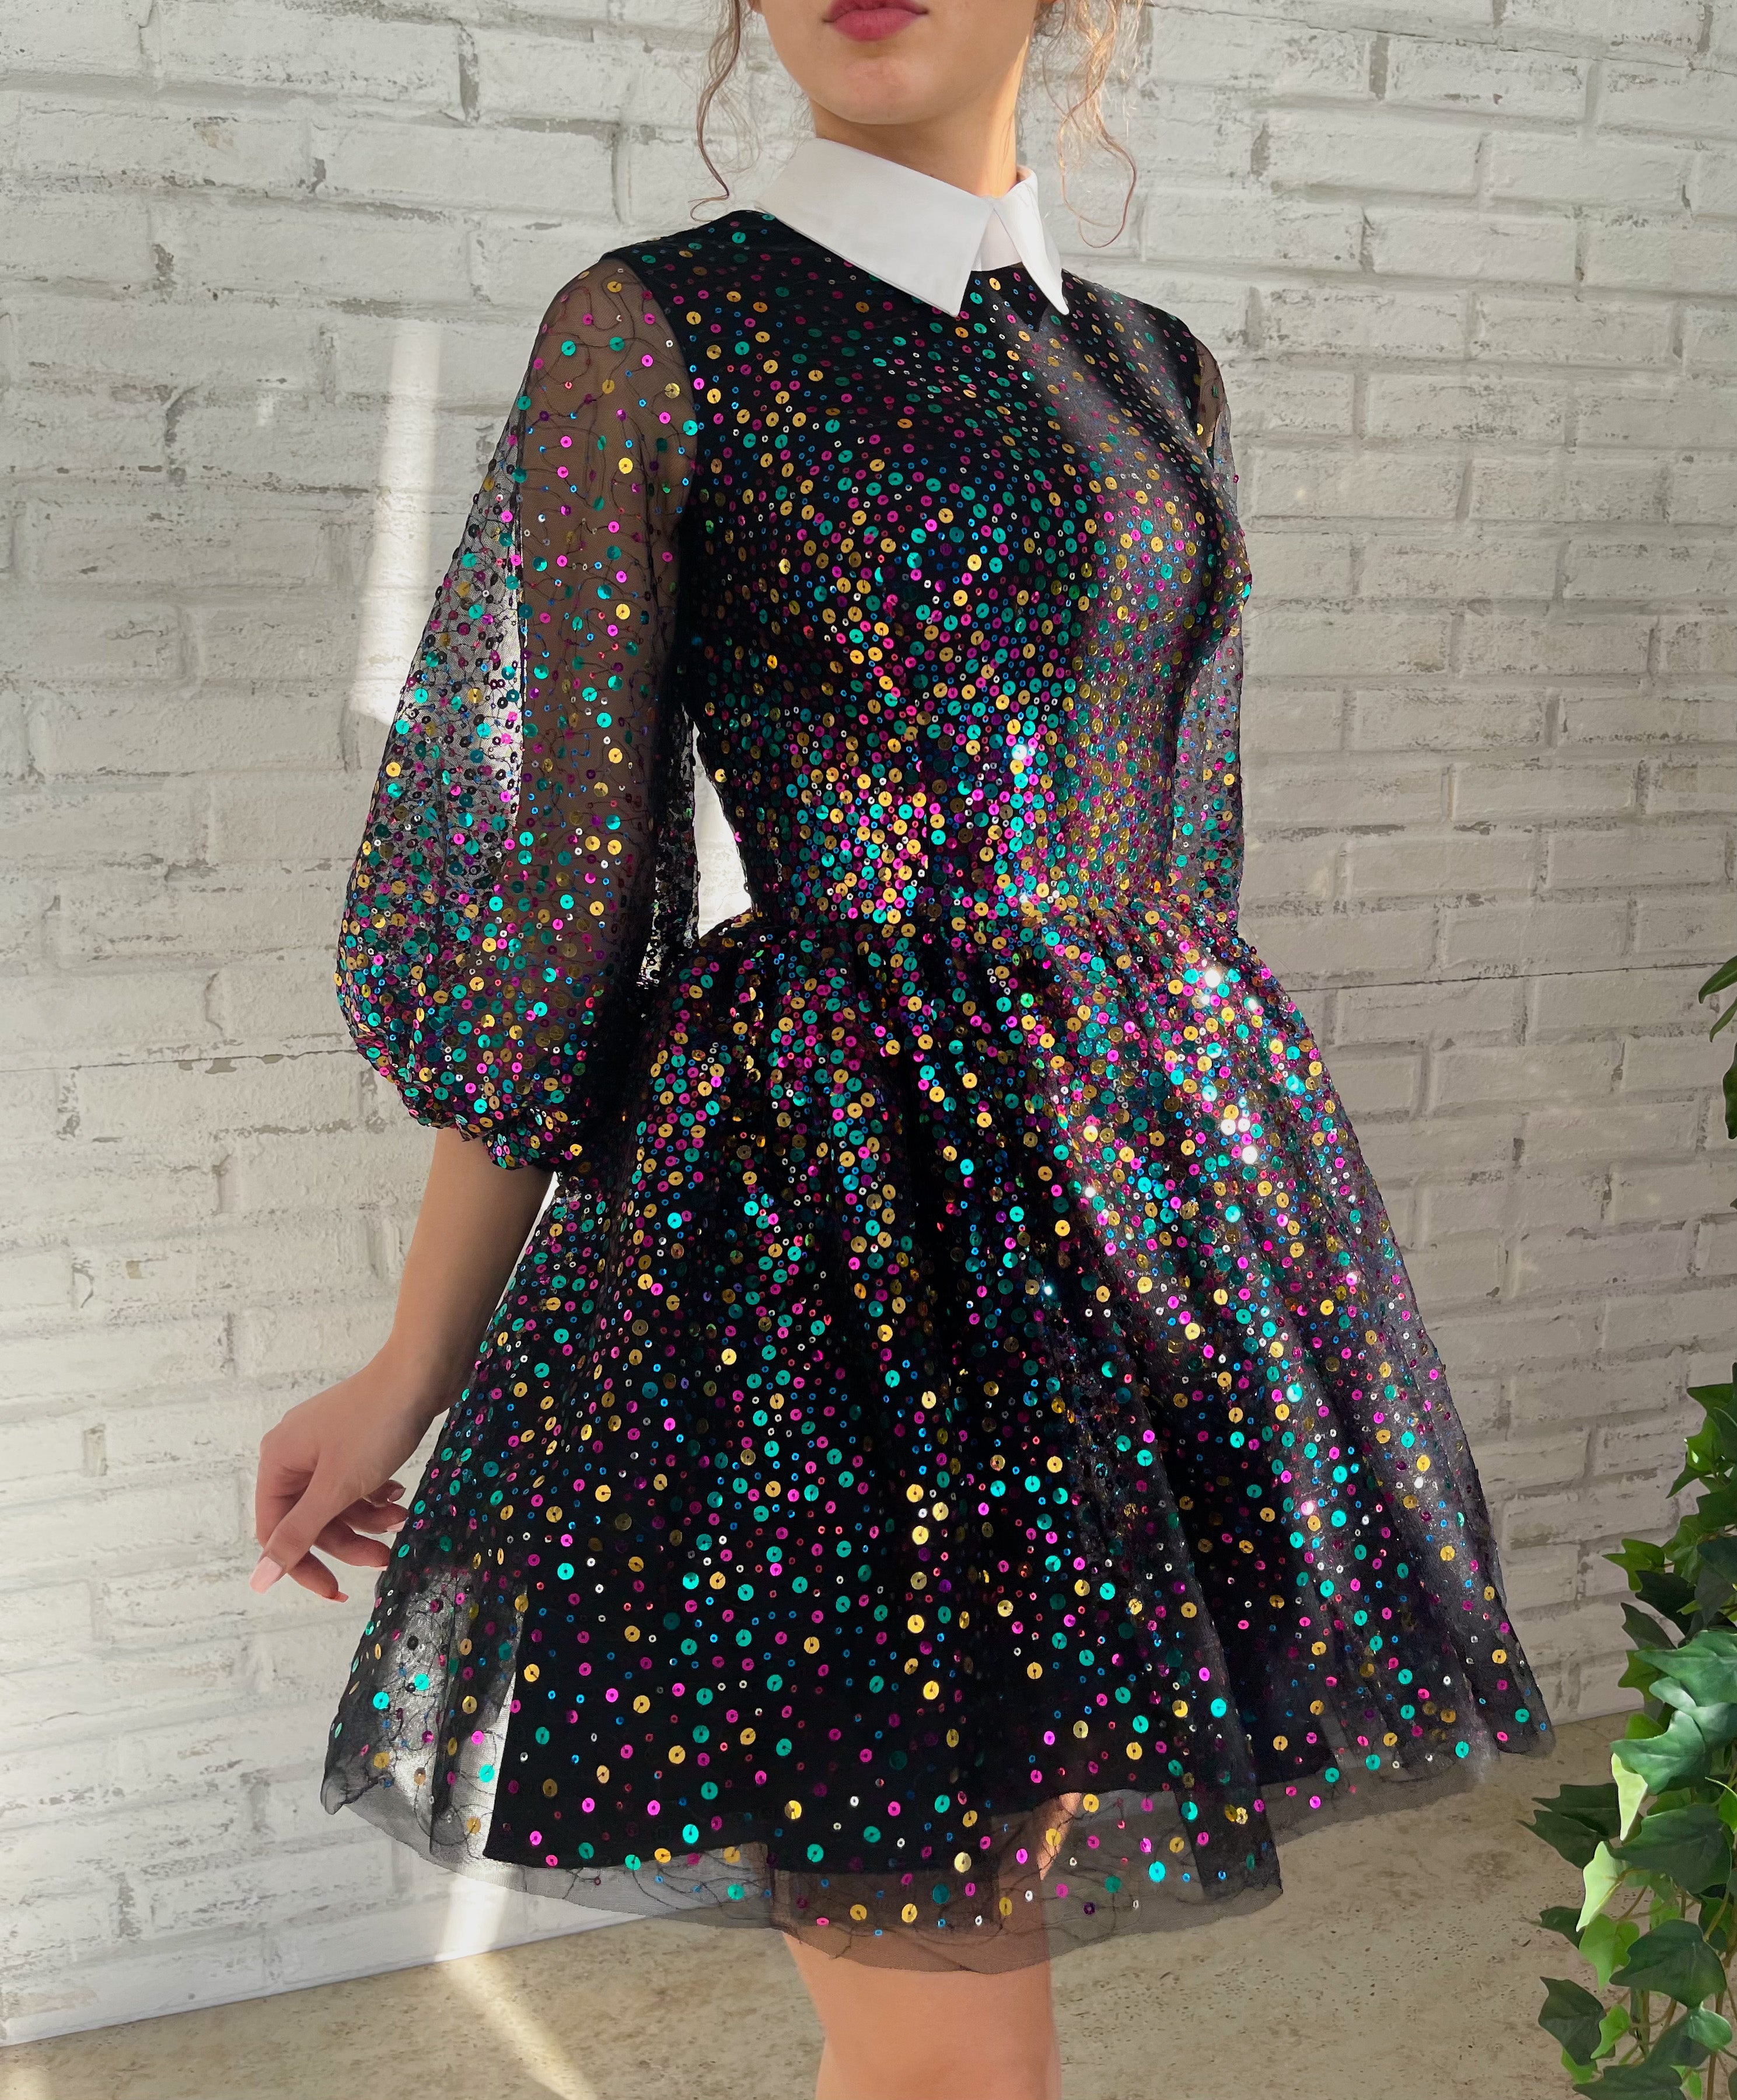 Black mini dress with sequins and short sleeves